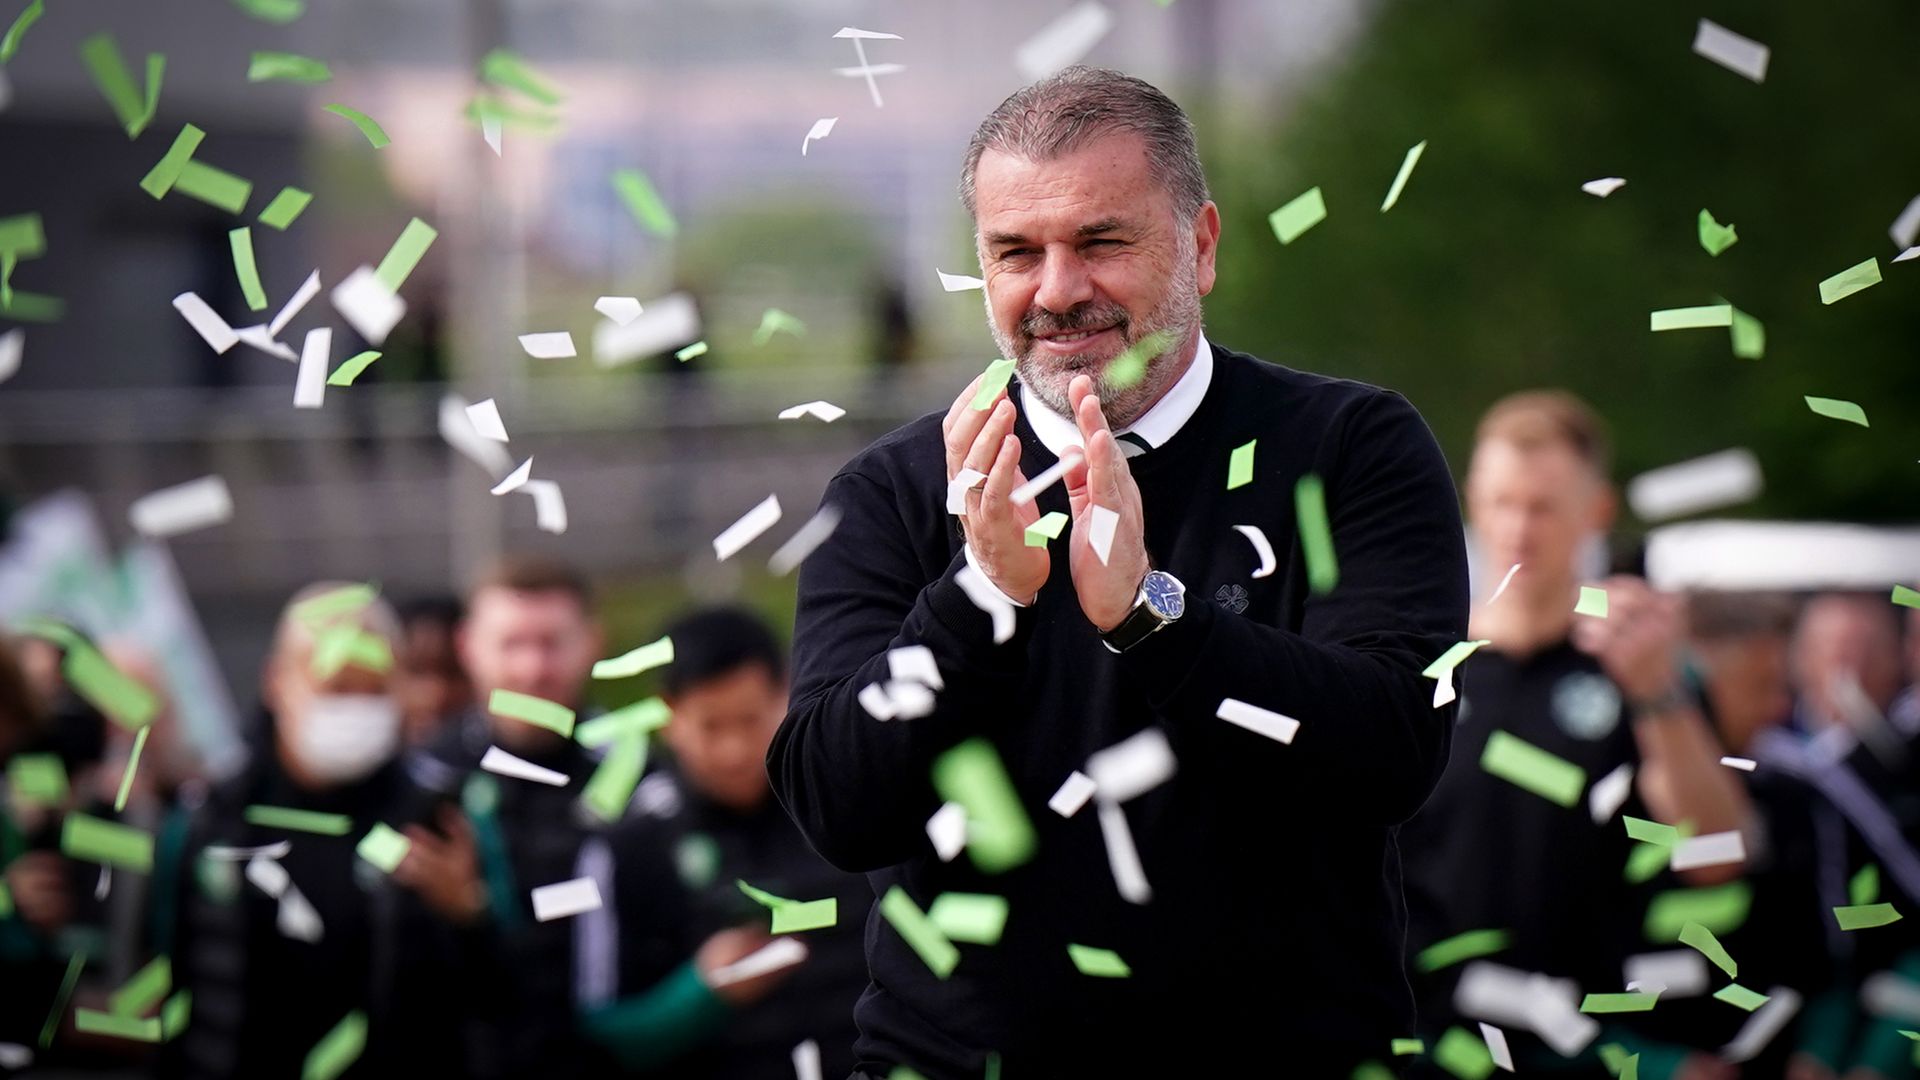 Postecoglou reflects on 'positive' year at Celtic